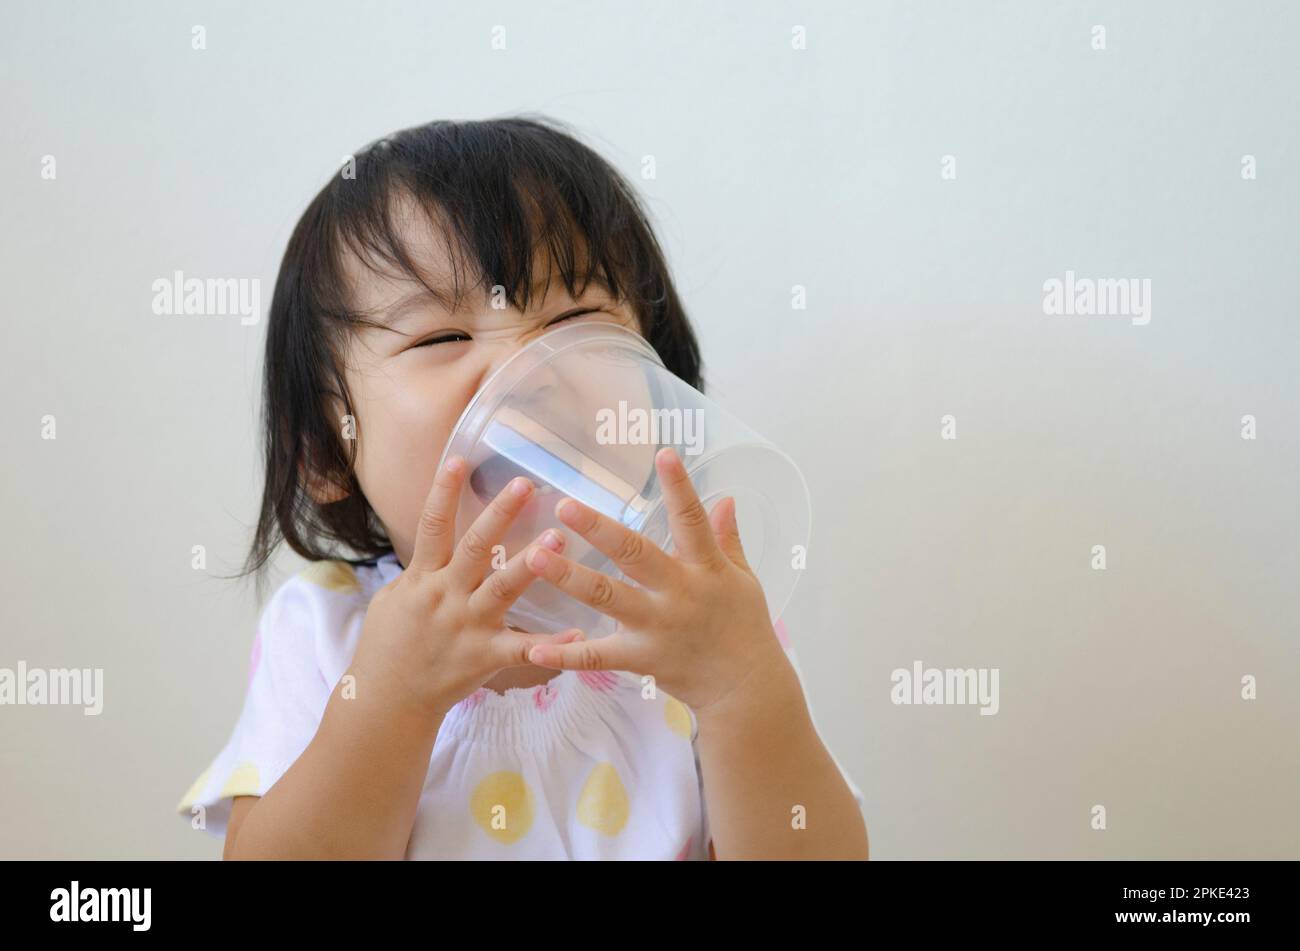 Girl laughing with plastic cup Stock Photo